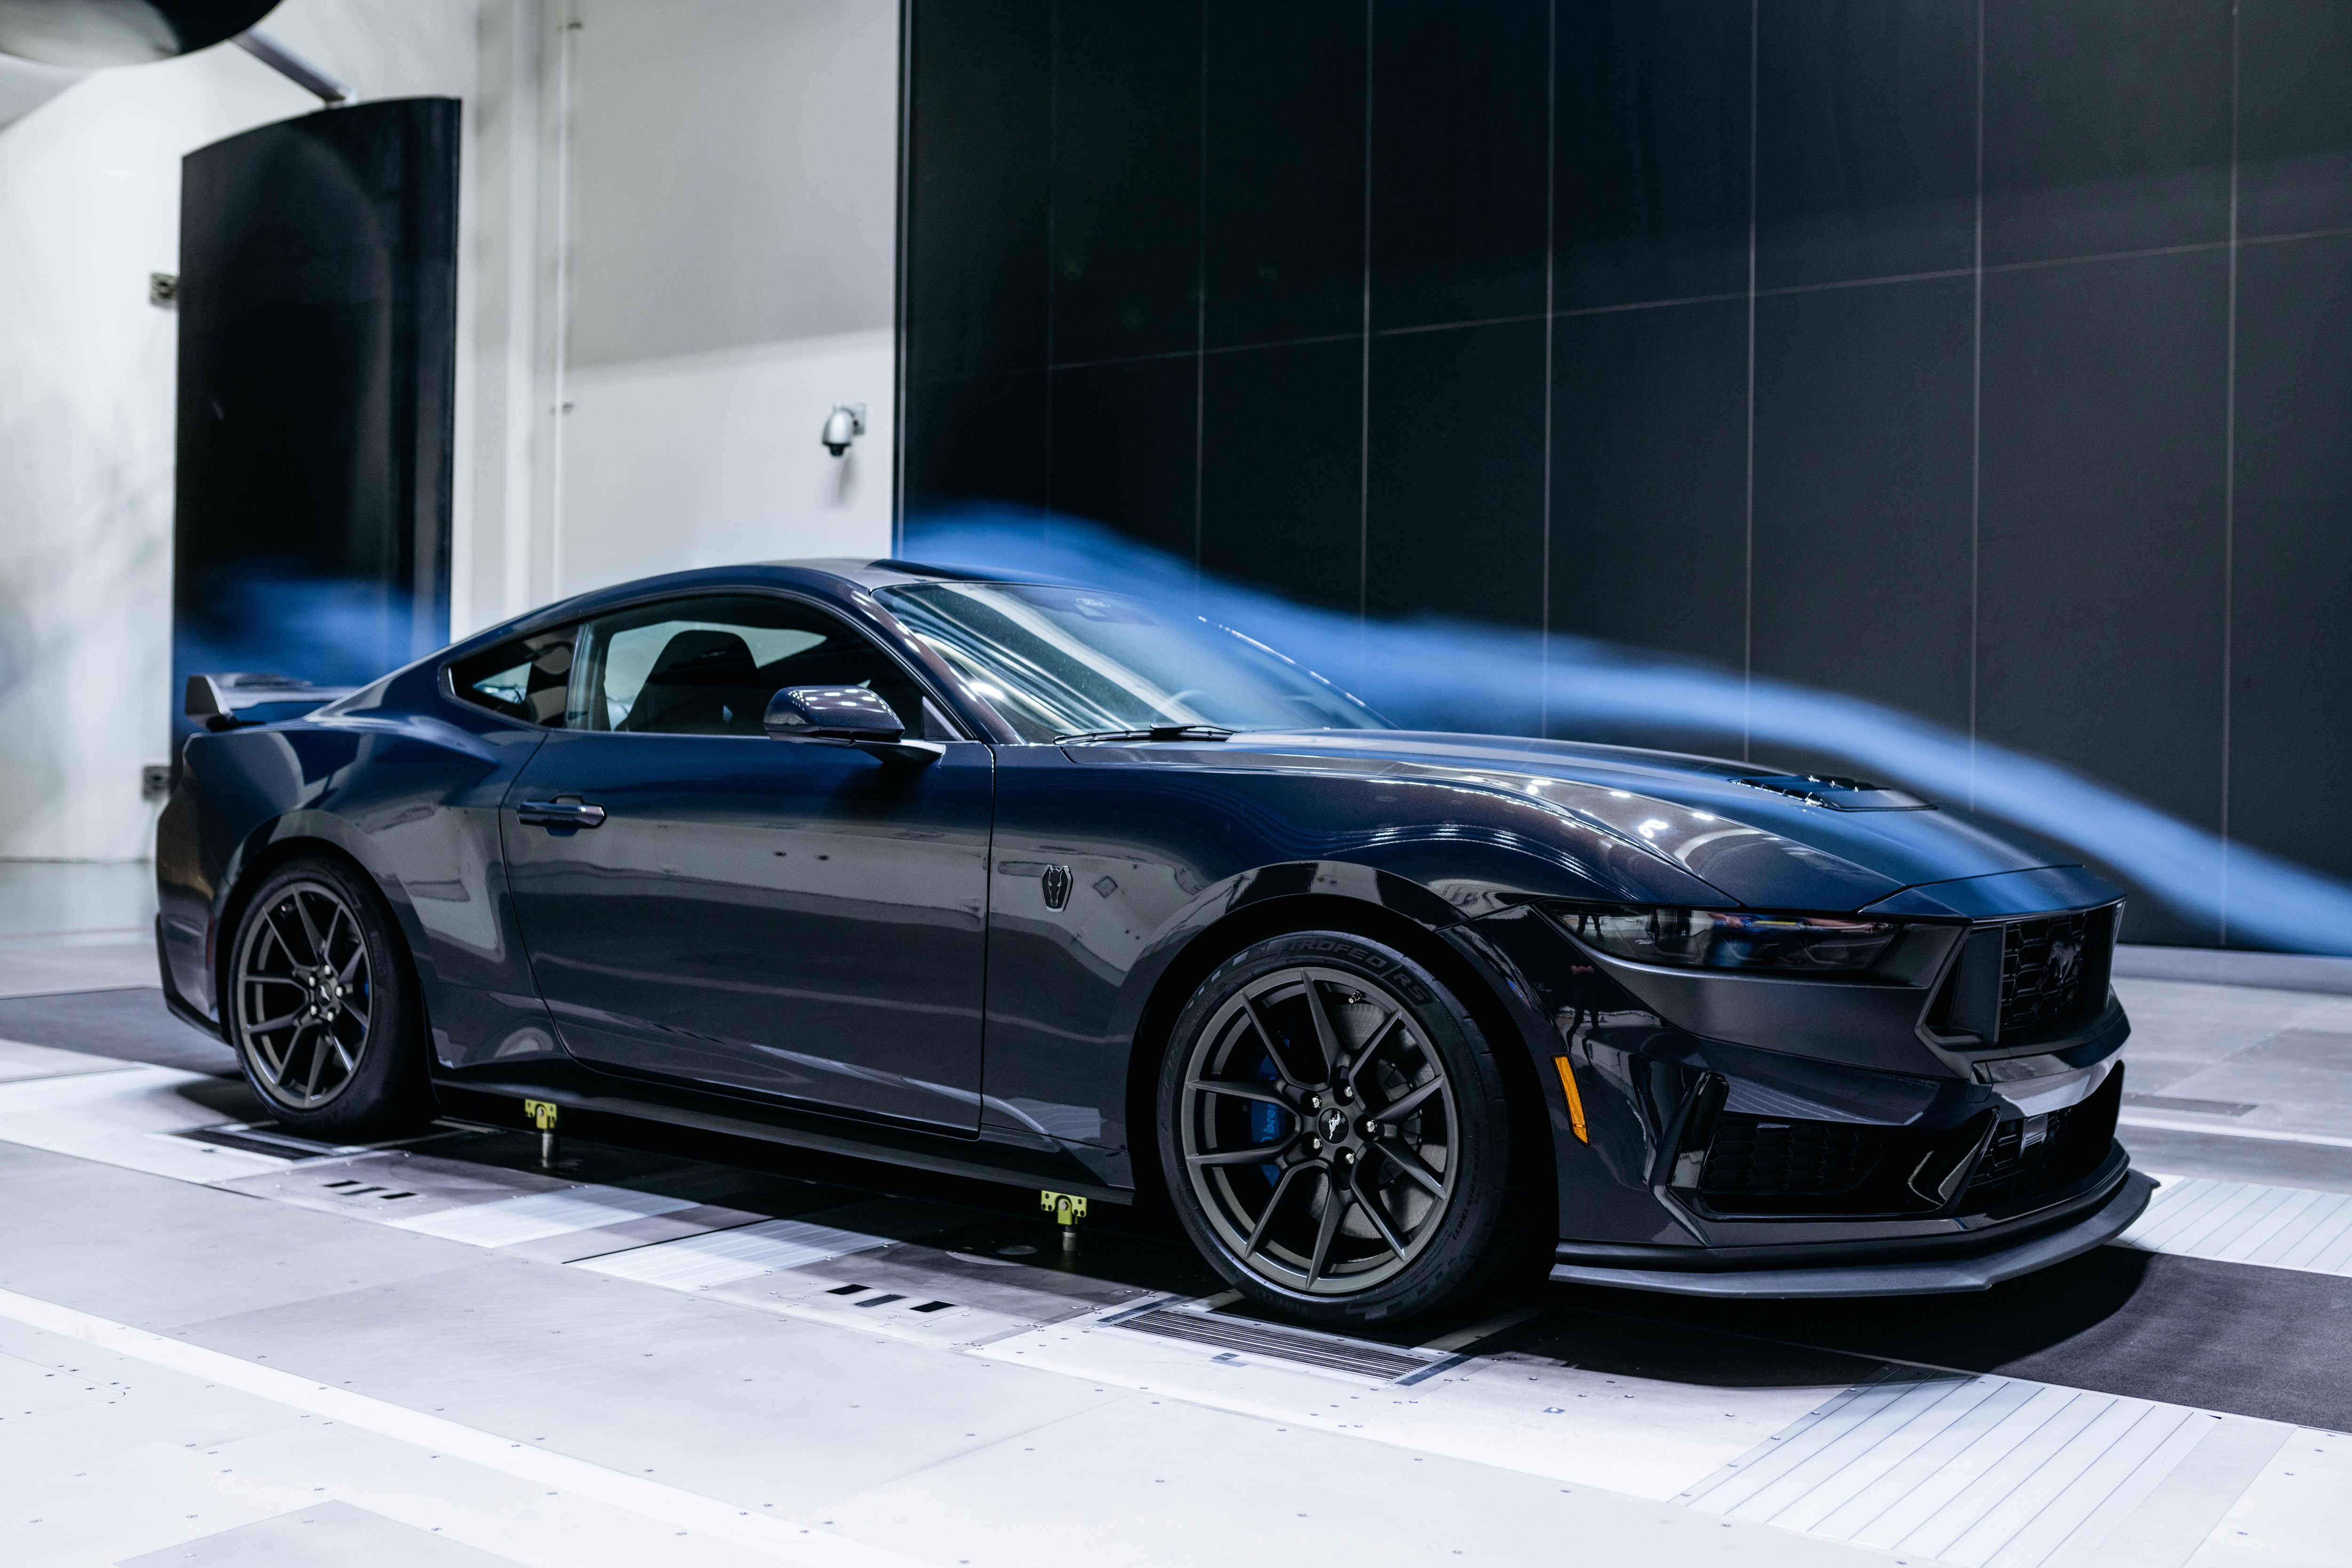 Ford's 200 MPH Wind Tunnel Gives the Mustang Dark Horse and GT3 an Edge